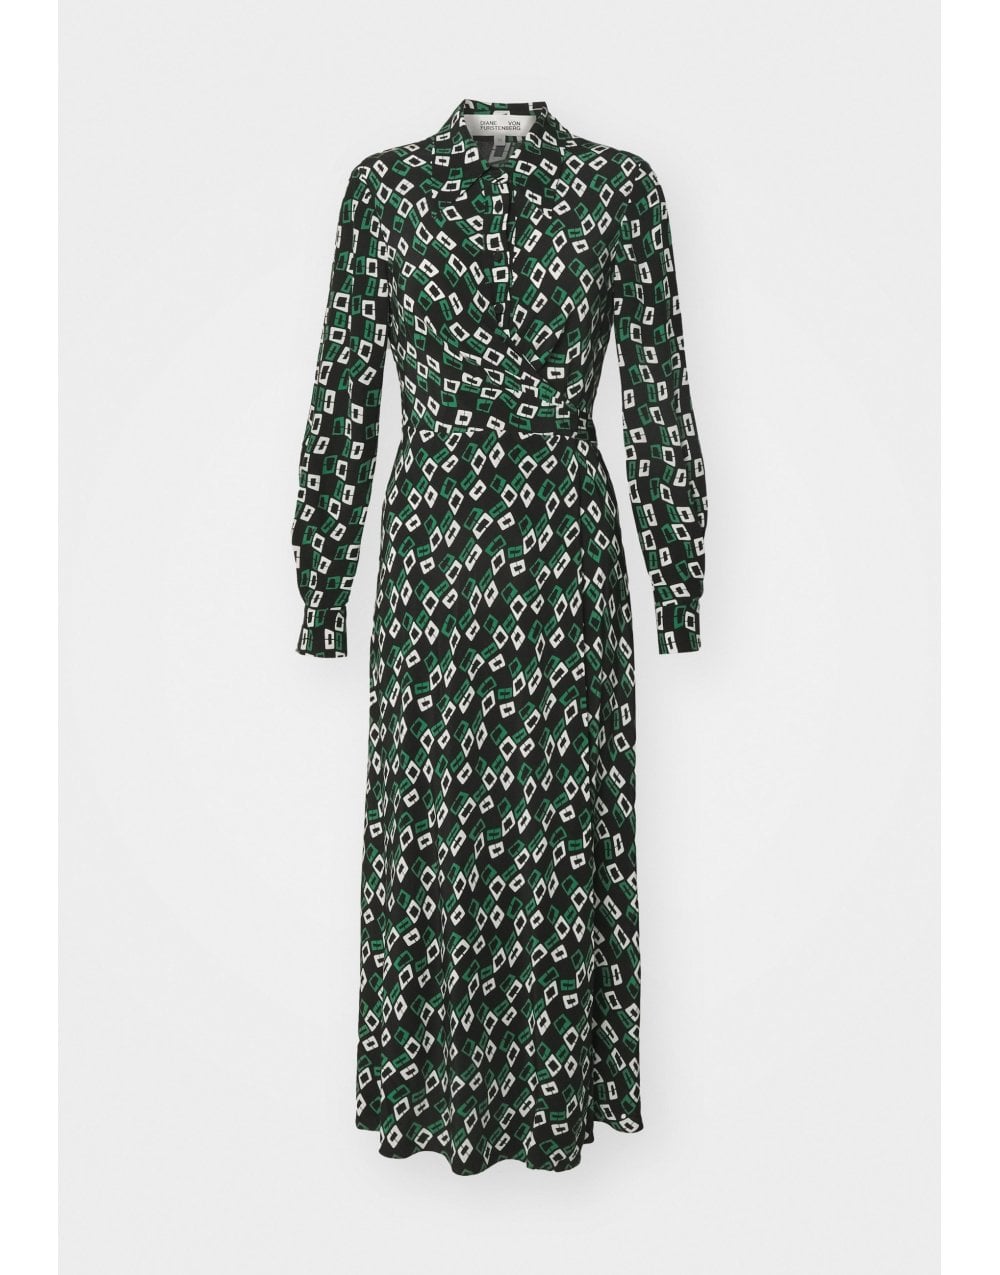 Diane Von Furstenberg Diane Von Furstenberg Tori Chain Button Up Wrap Belted Midi Dress Size